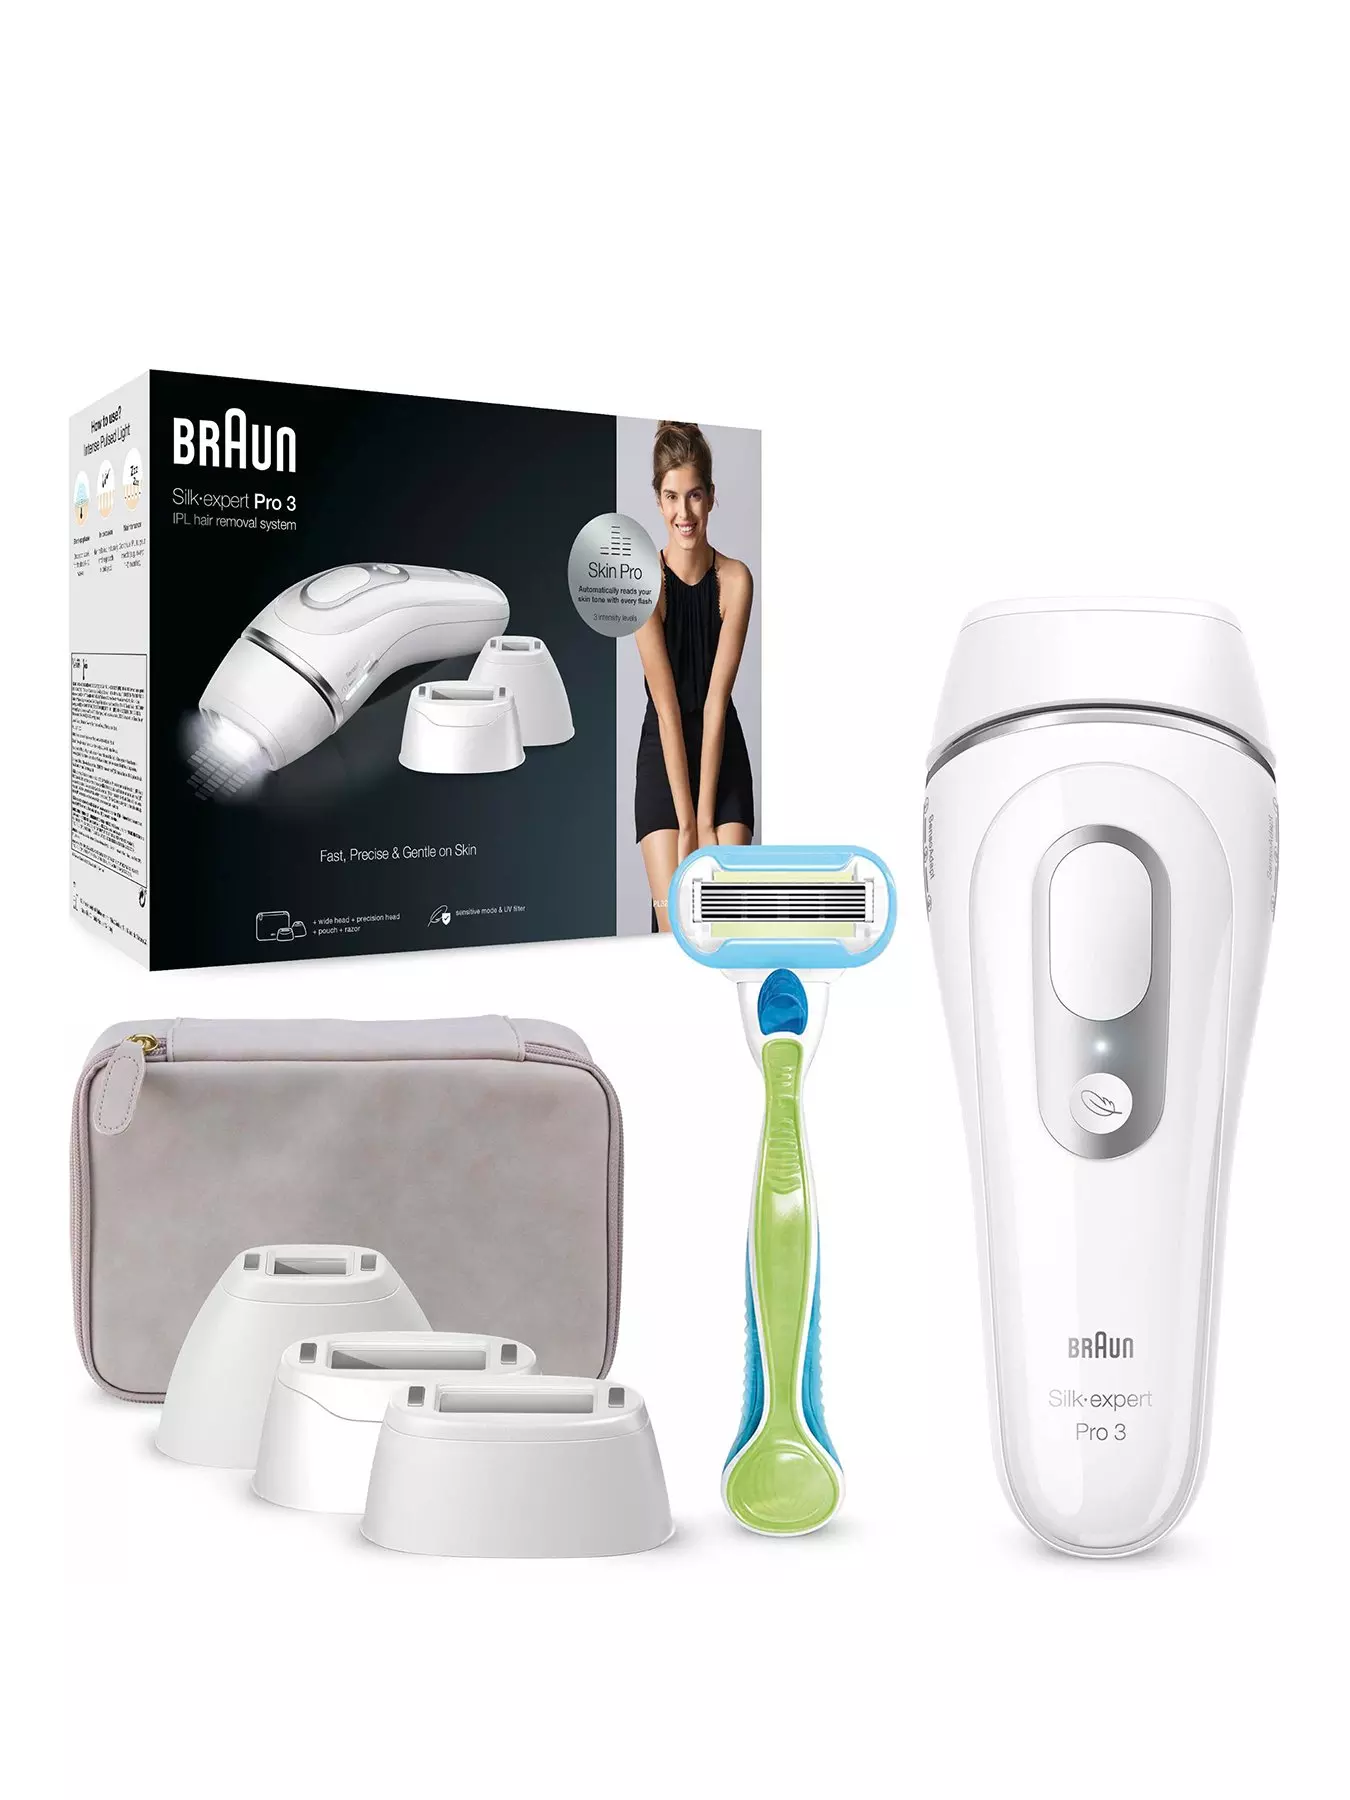 Which Is Better: Braun or Philips IPL?